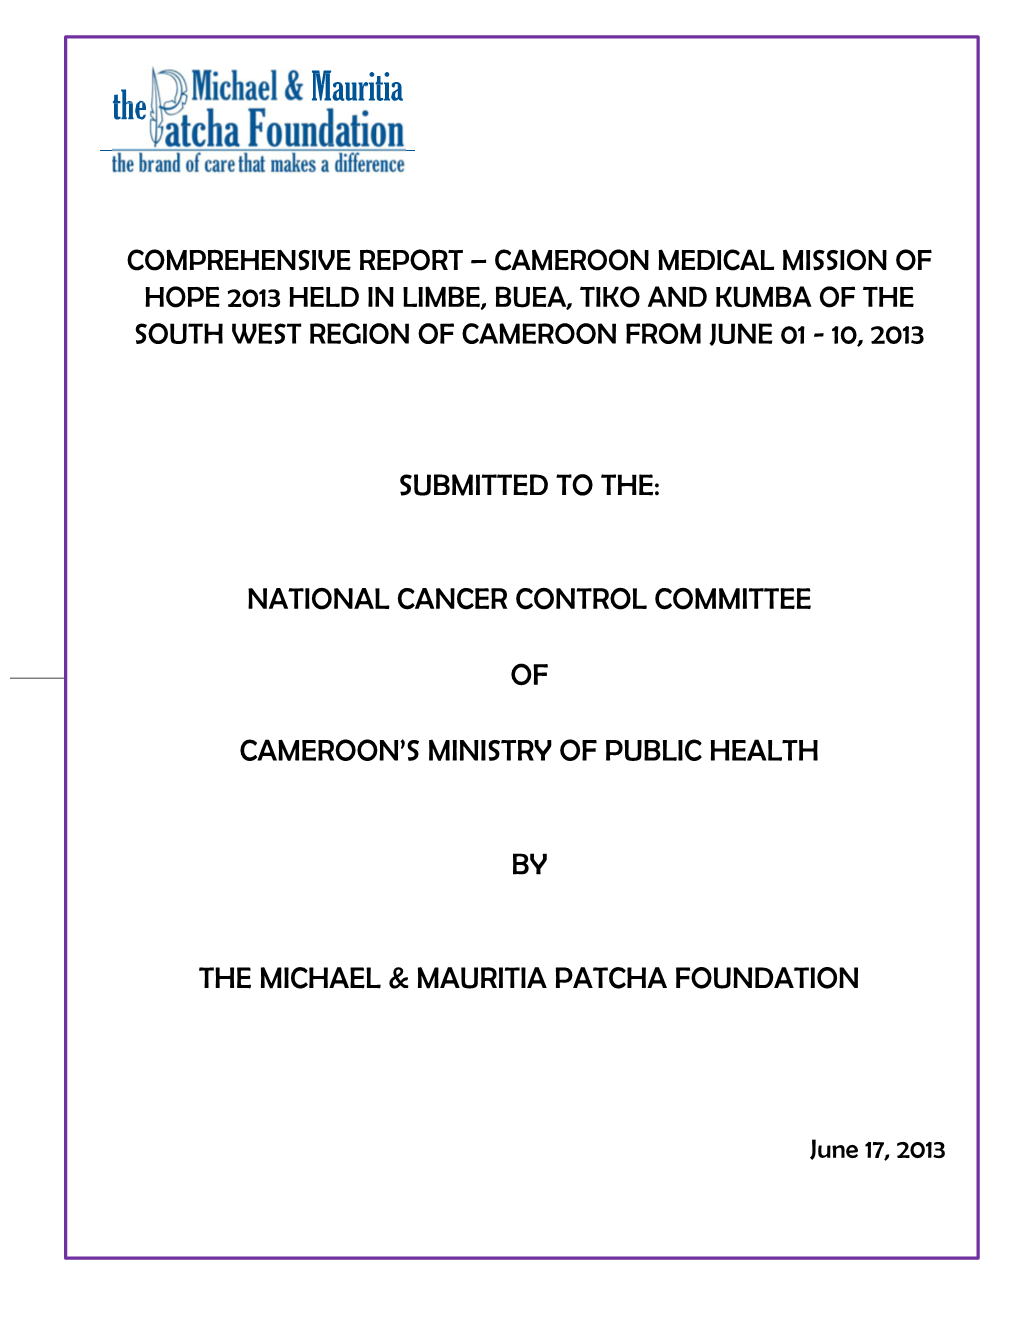 National Cancer Control Committee of Cameroon's Ministry of Public Health by the Michael & Mauritia Patc